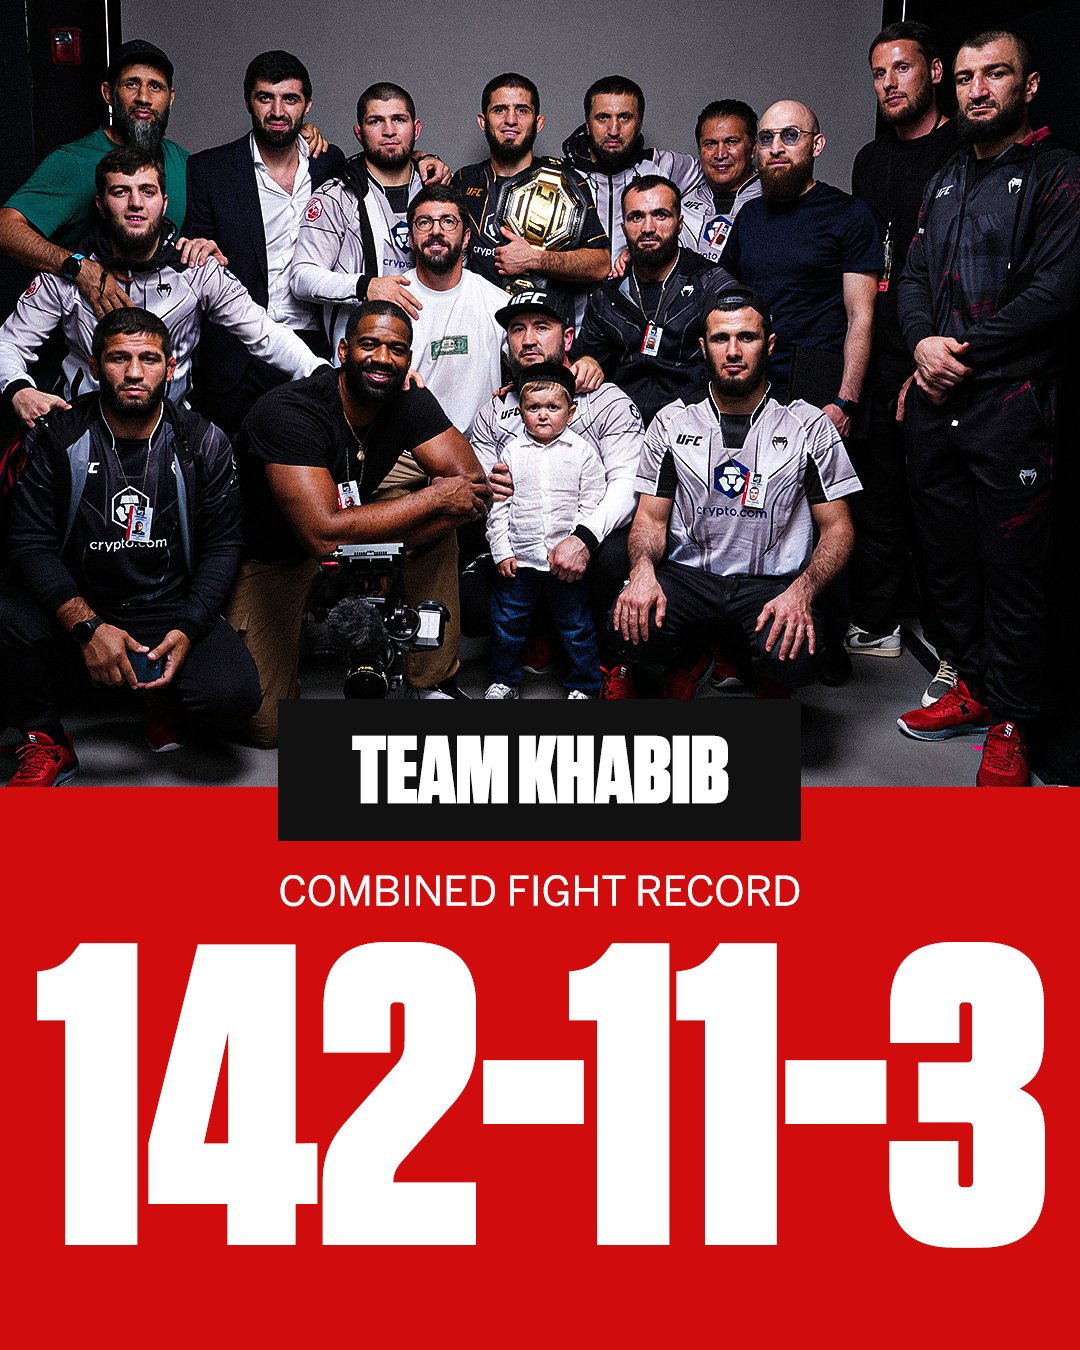 From Khabib to Makhachev, why is Dagestan producing elite MMA fighters?